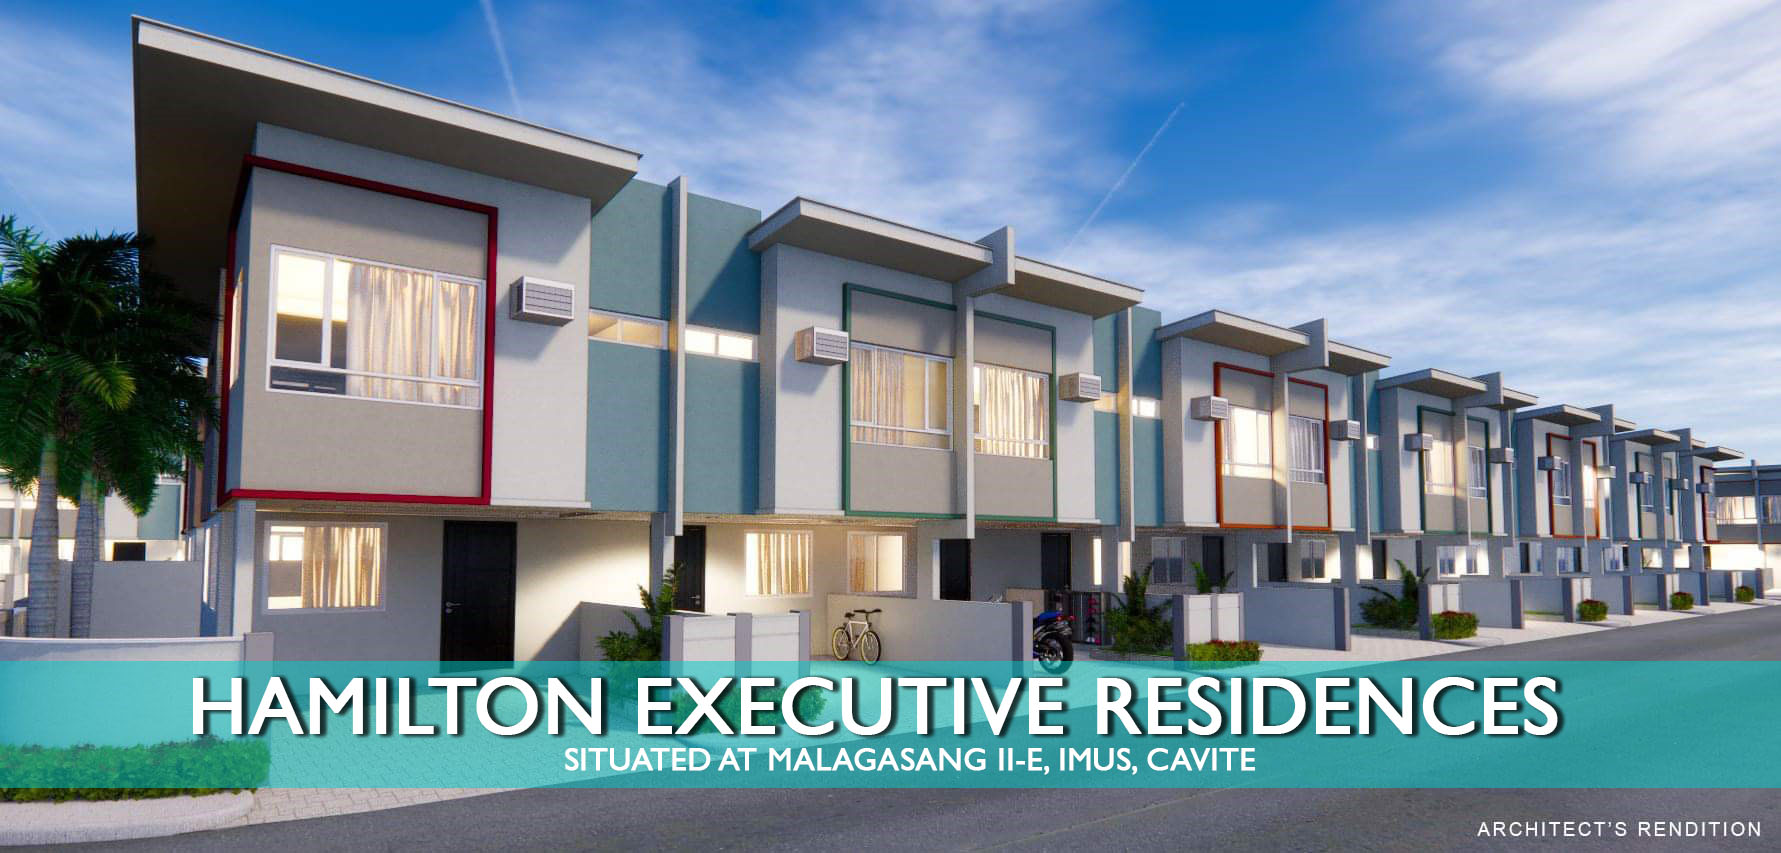 3BR, 2T&B, 1 CARPARK IN IMUS CAVITE WITH IN-HOUSE FINANCING